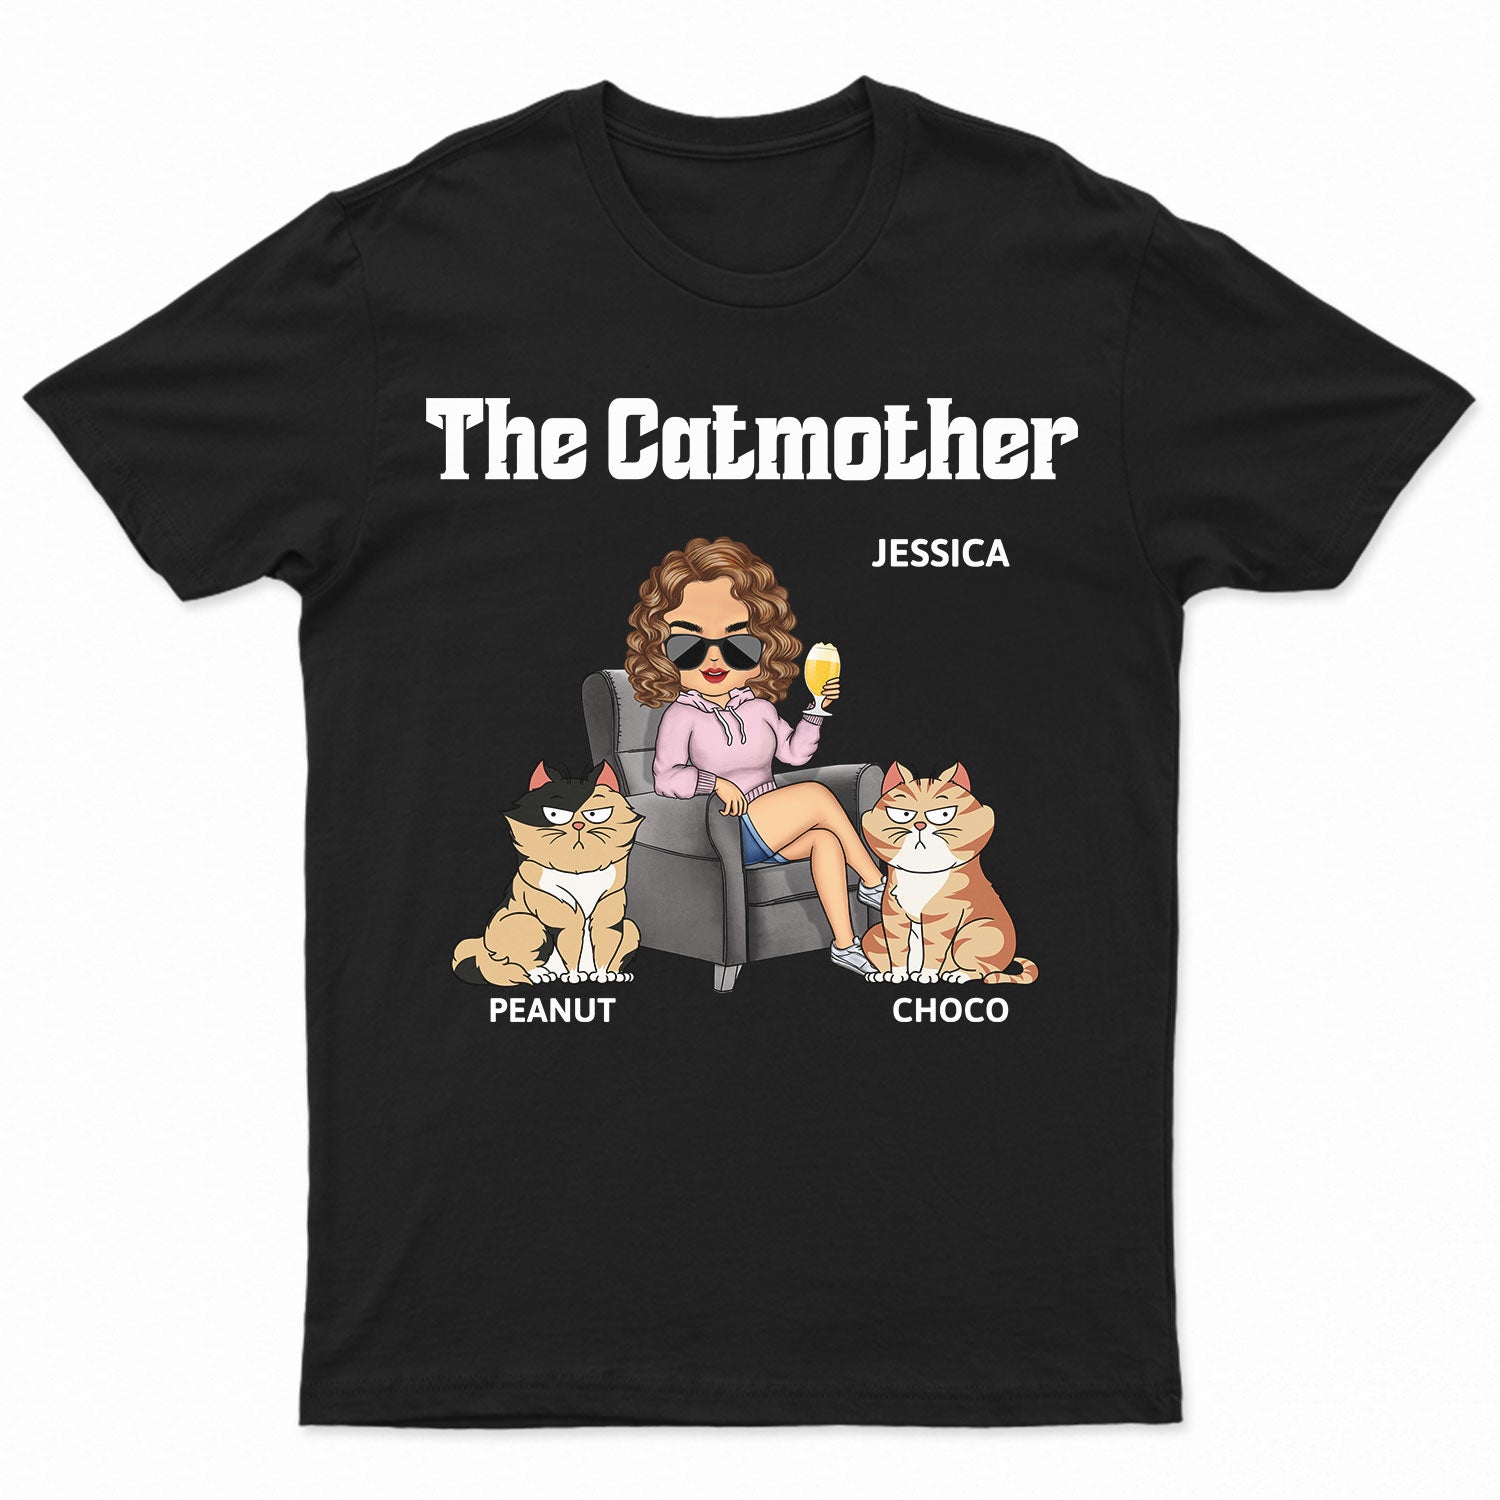 The Cat Mother - Gift For Cat Moms, Cat Lovers, Women, Yourself - Personalized T Shirt